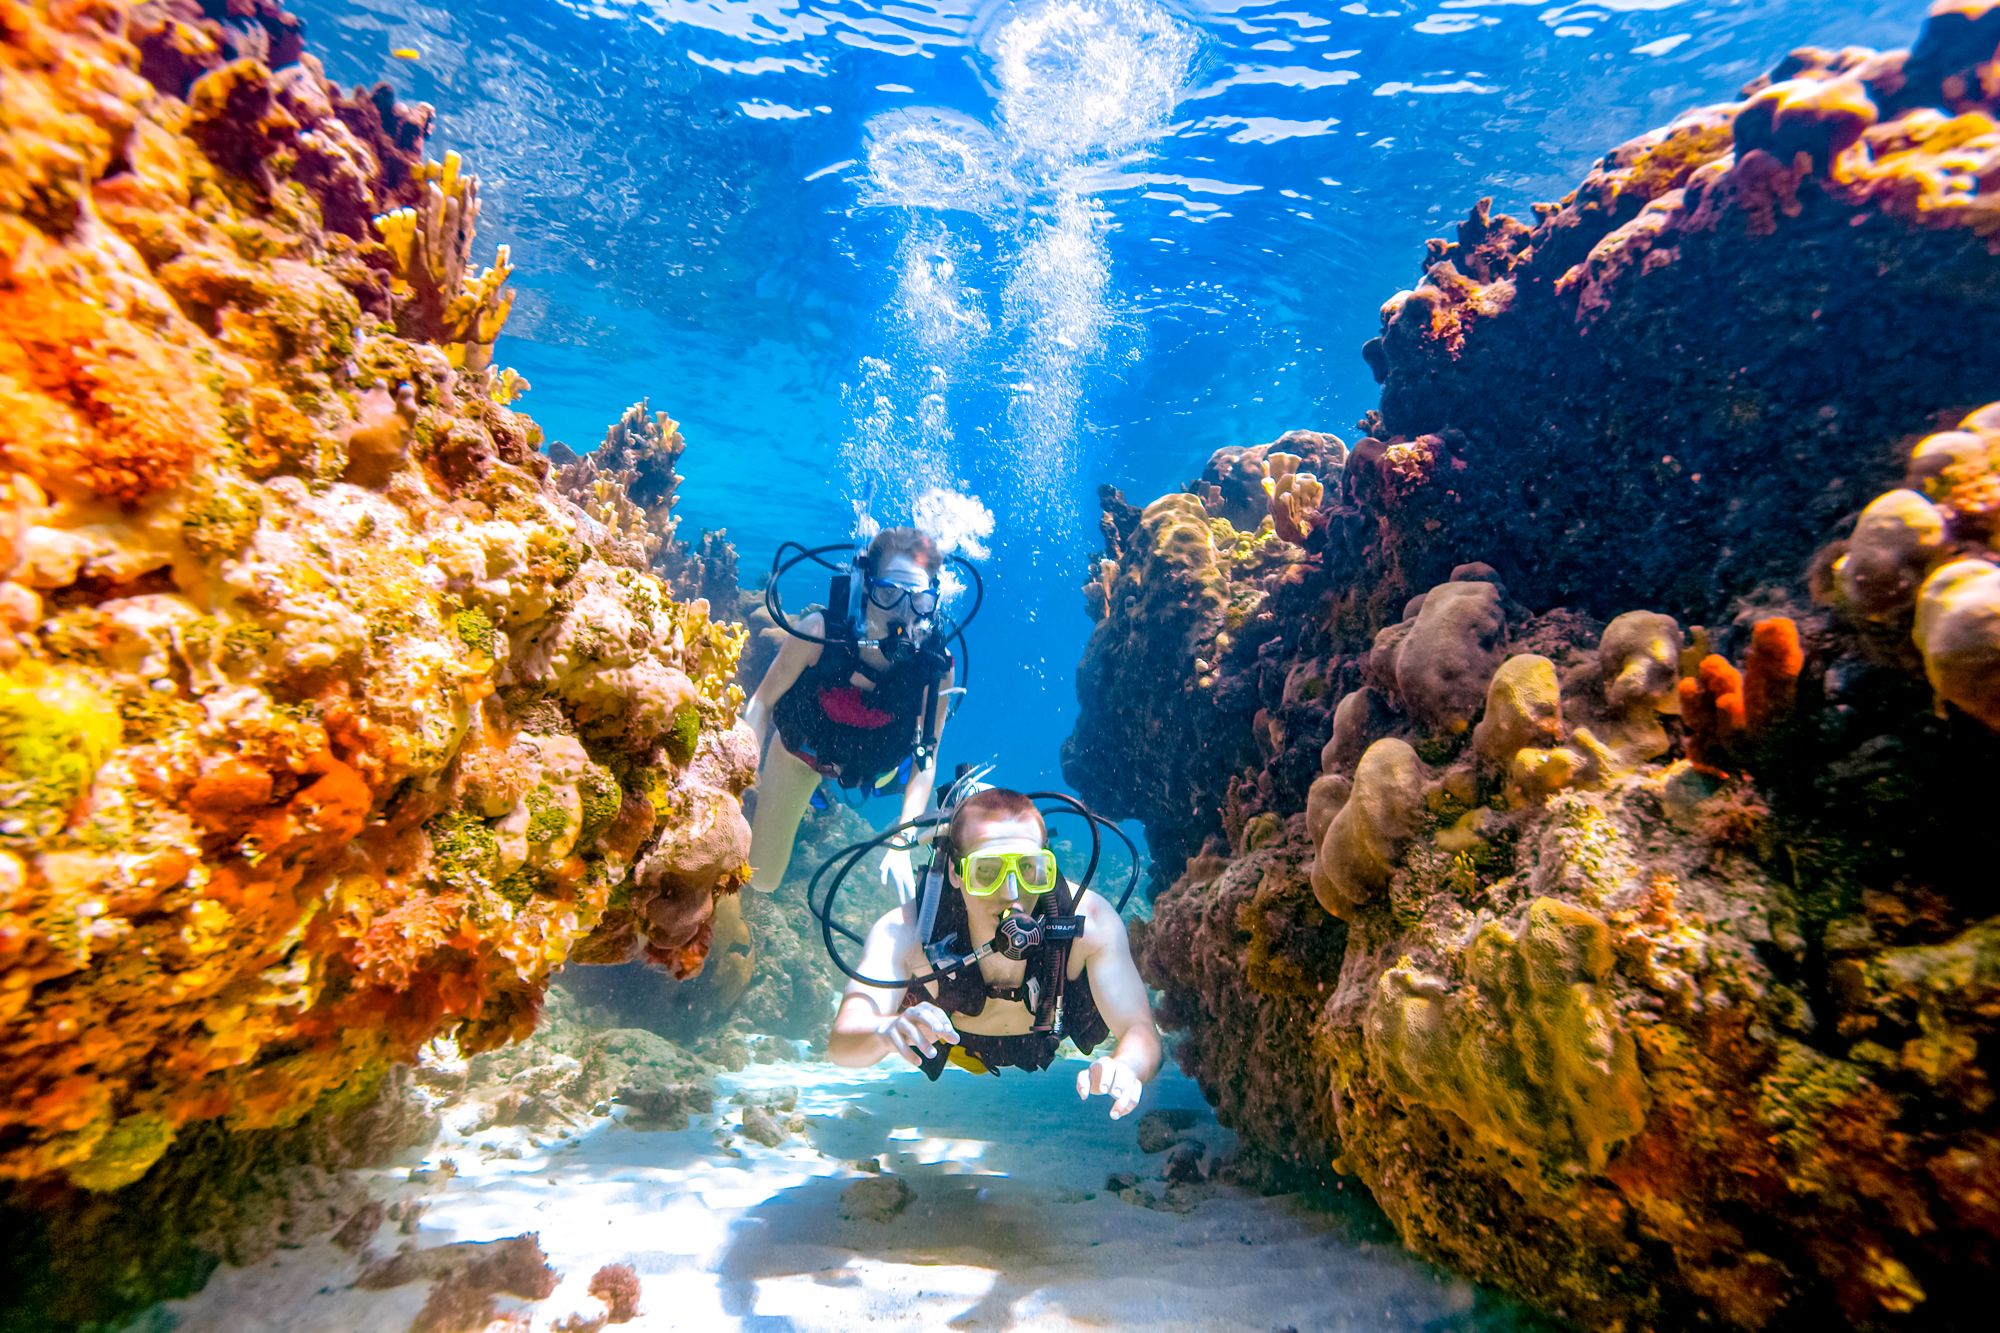 Are you ready to go scuba diving in Montego Bay? Here are the best spots for this aquatic adventure.